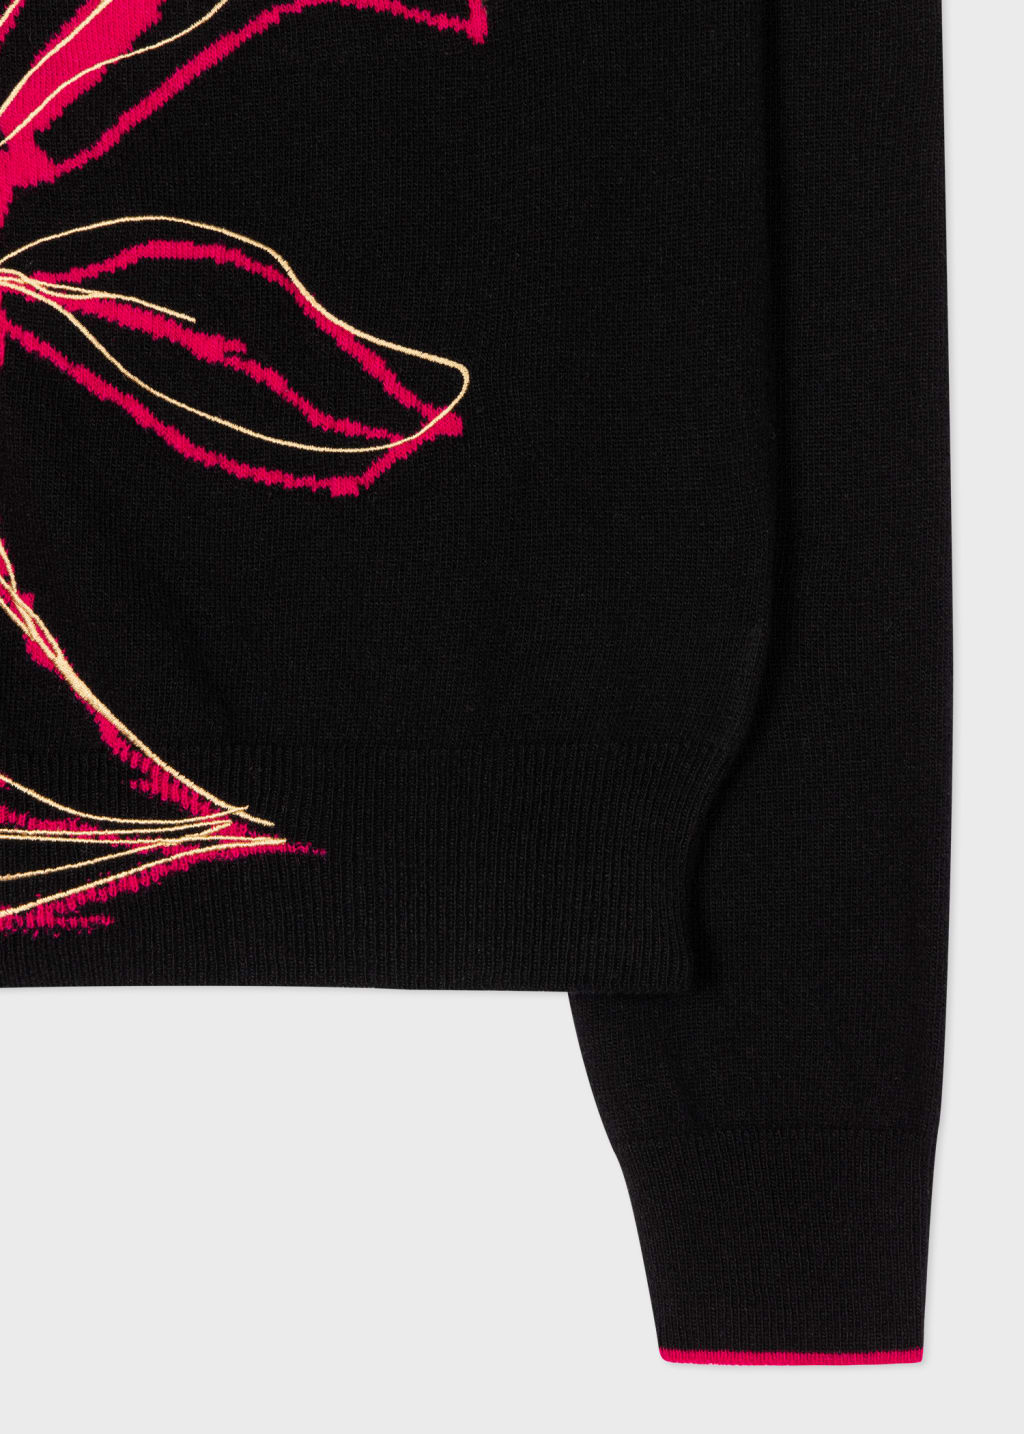 Detail View - Women's Black 'Ink Floral' Lambswool Sweater Paul Smith